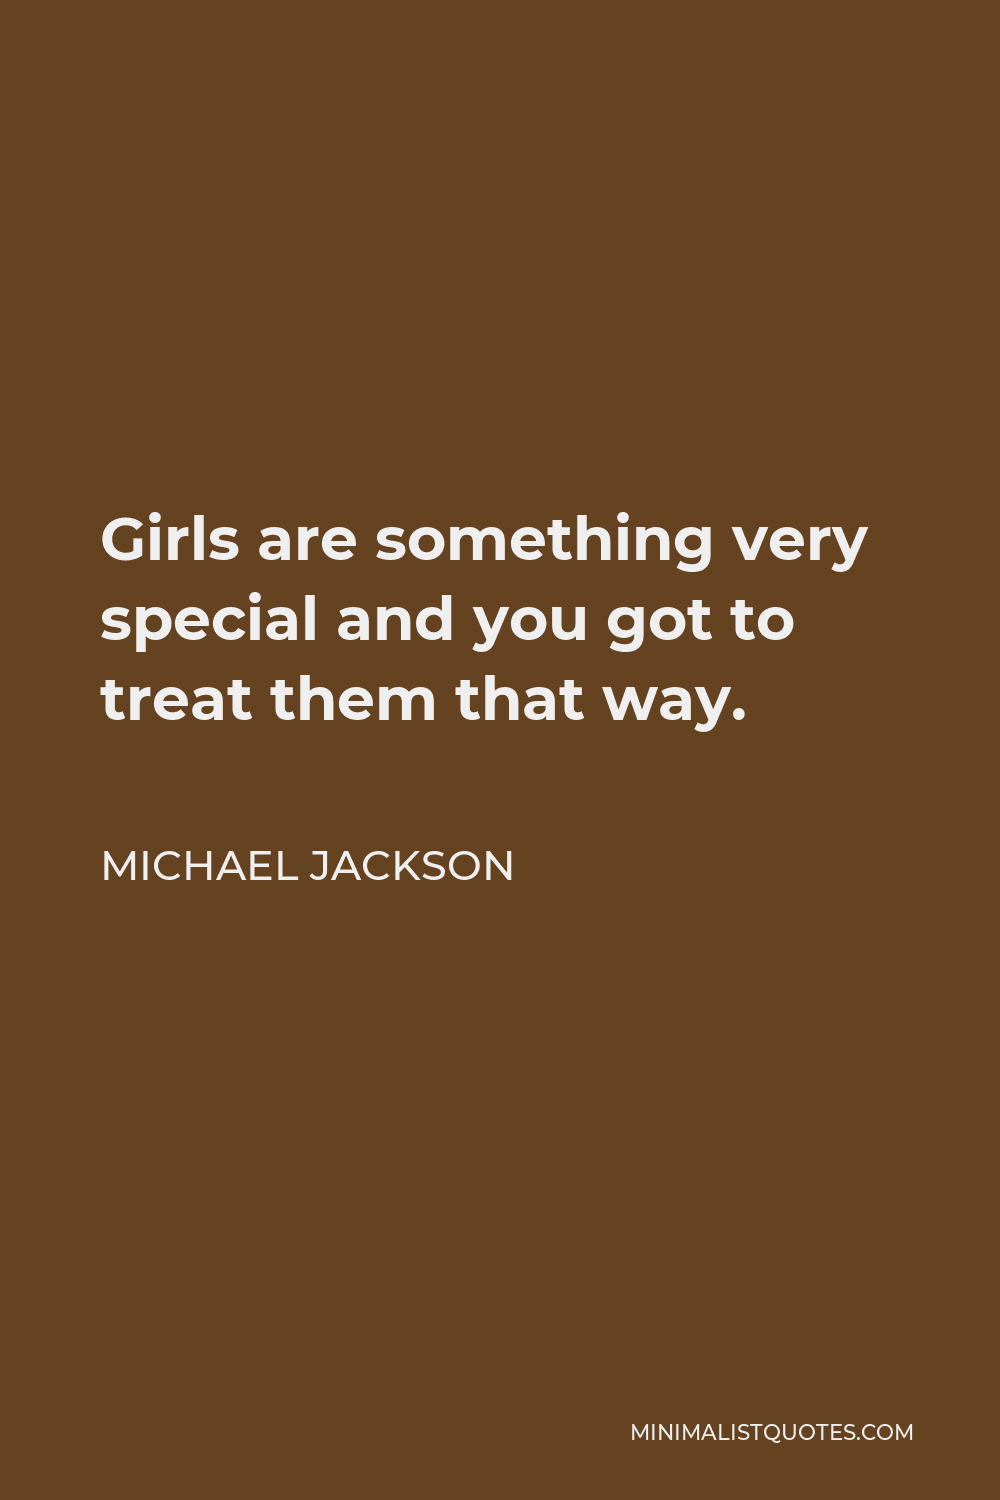 Michael Jackson Quote - Girls are something very special and you got to treat them that way.